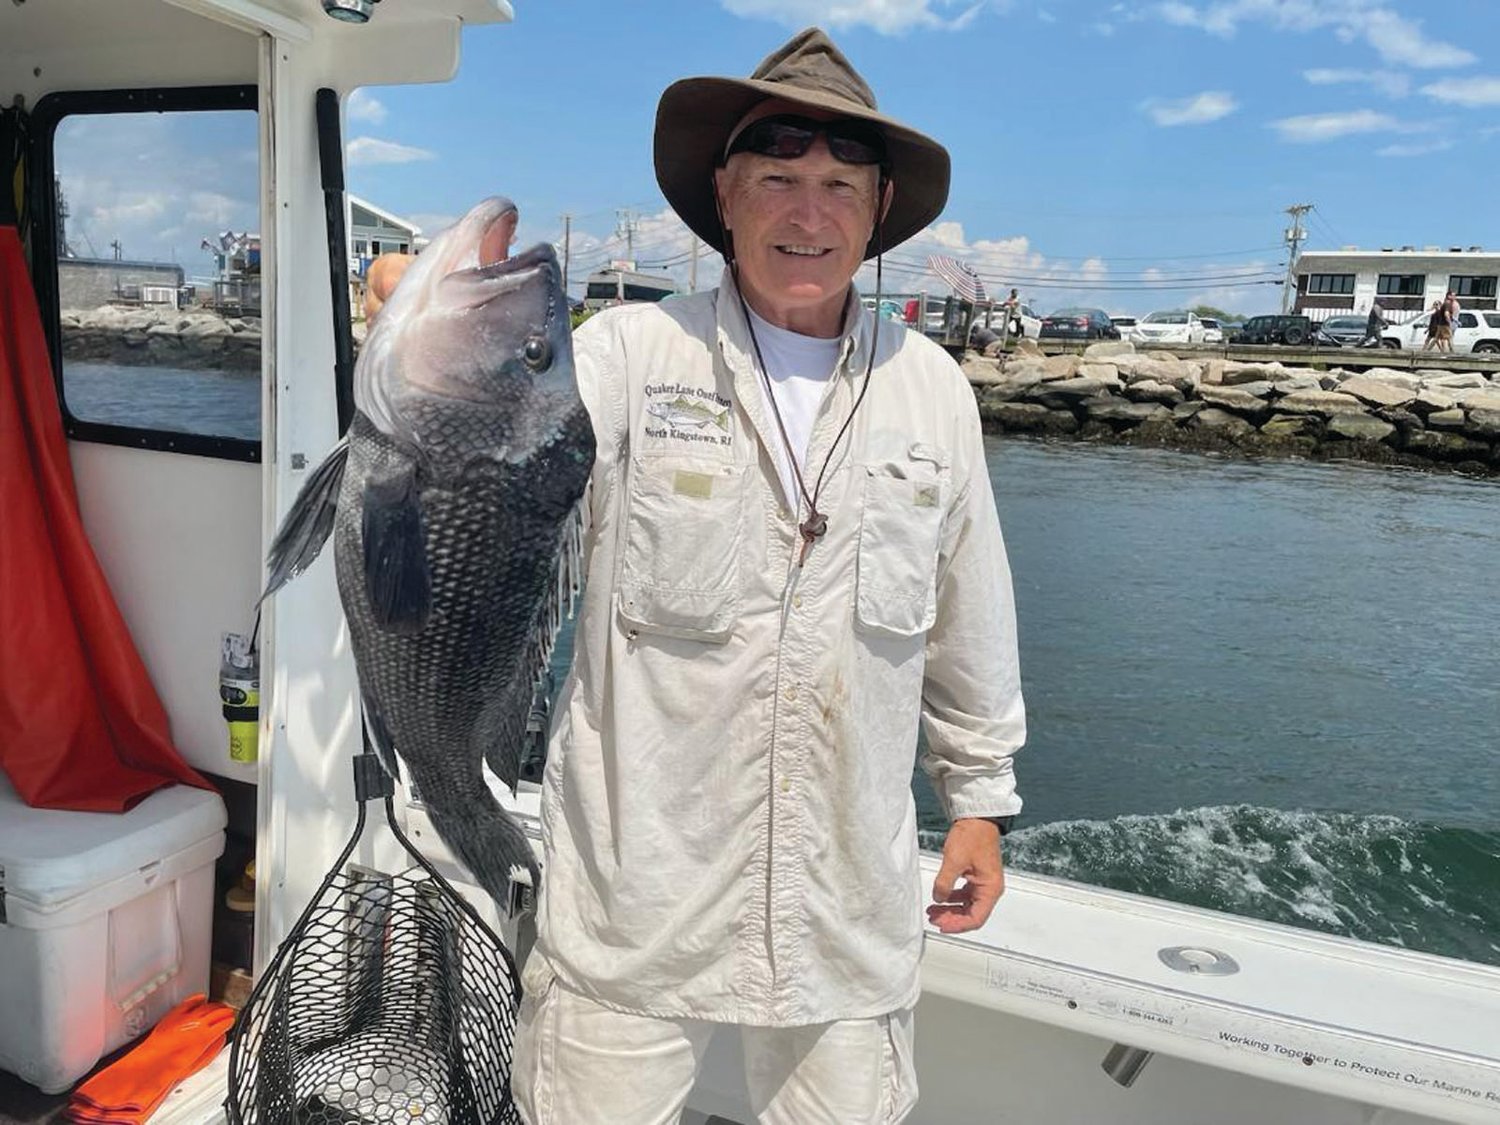 BLACK SEA BASS: Mitch Wilsie with a 5.28 pound black sea bass. Black sea bass harvest limits for 2022 are being reduced by 28 percent in Massachusetts, Rhode Island and other coastal states. (Submitted photo)